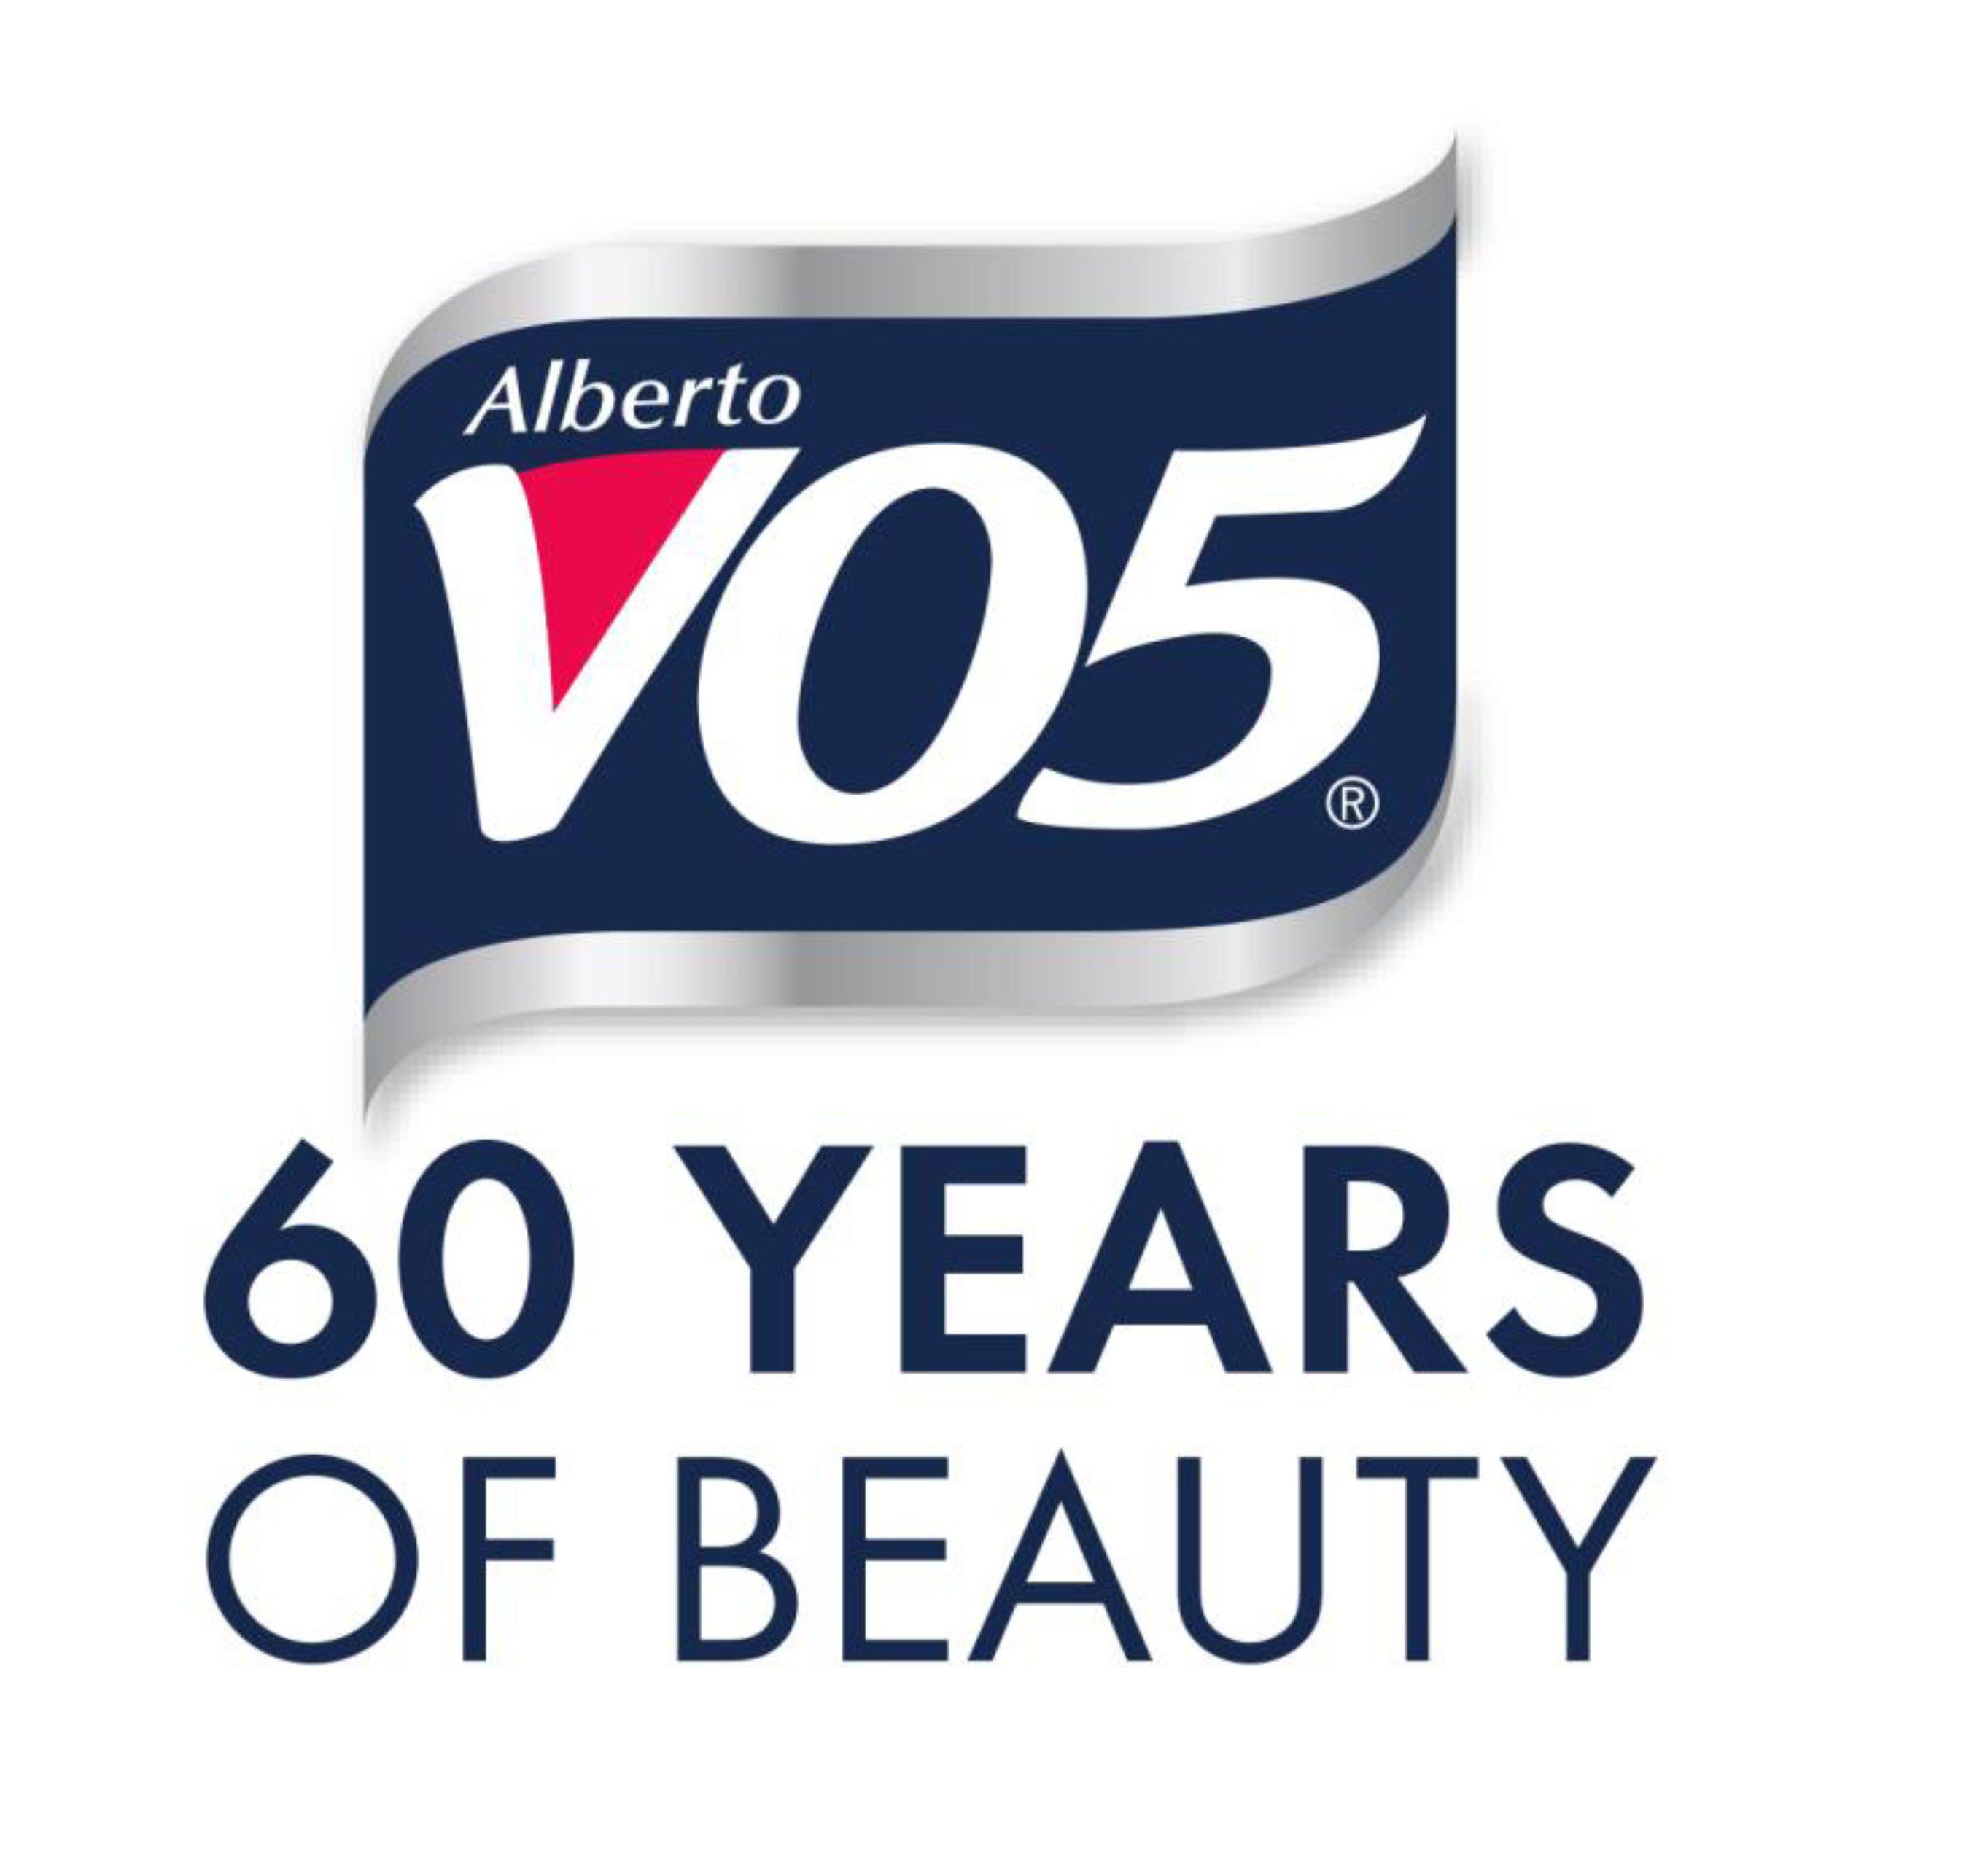 VO5 Logo - Alberto VO5 Celebrates Its 60th Birthday With Petition For A Star On